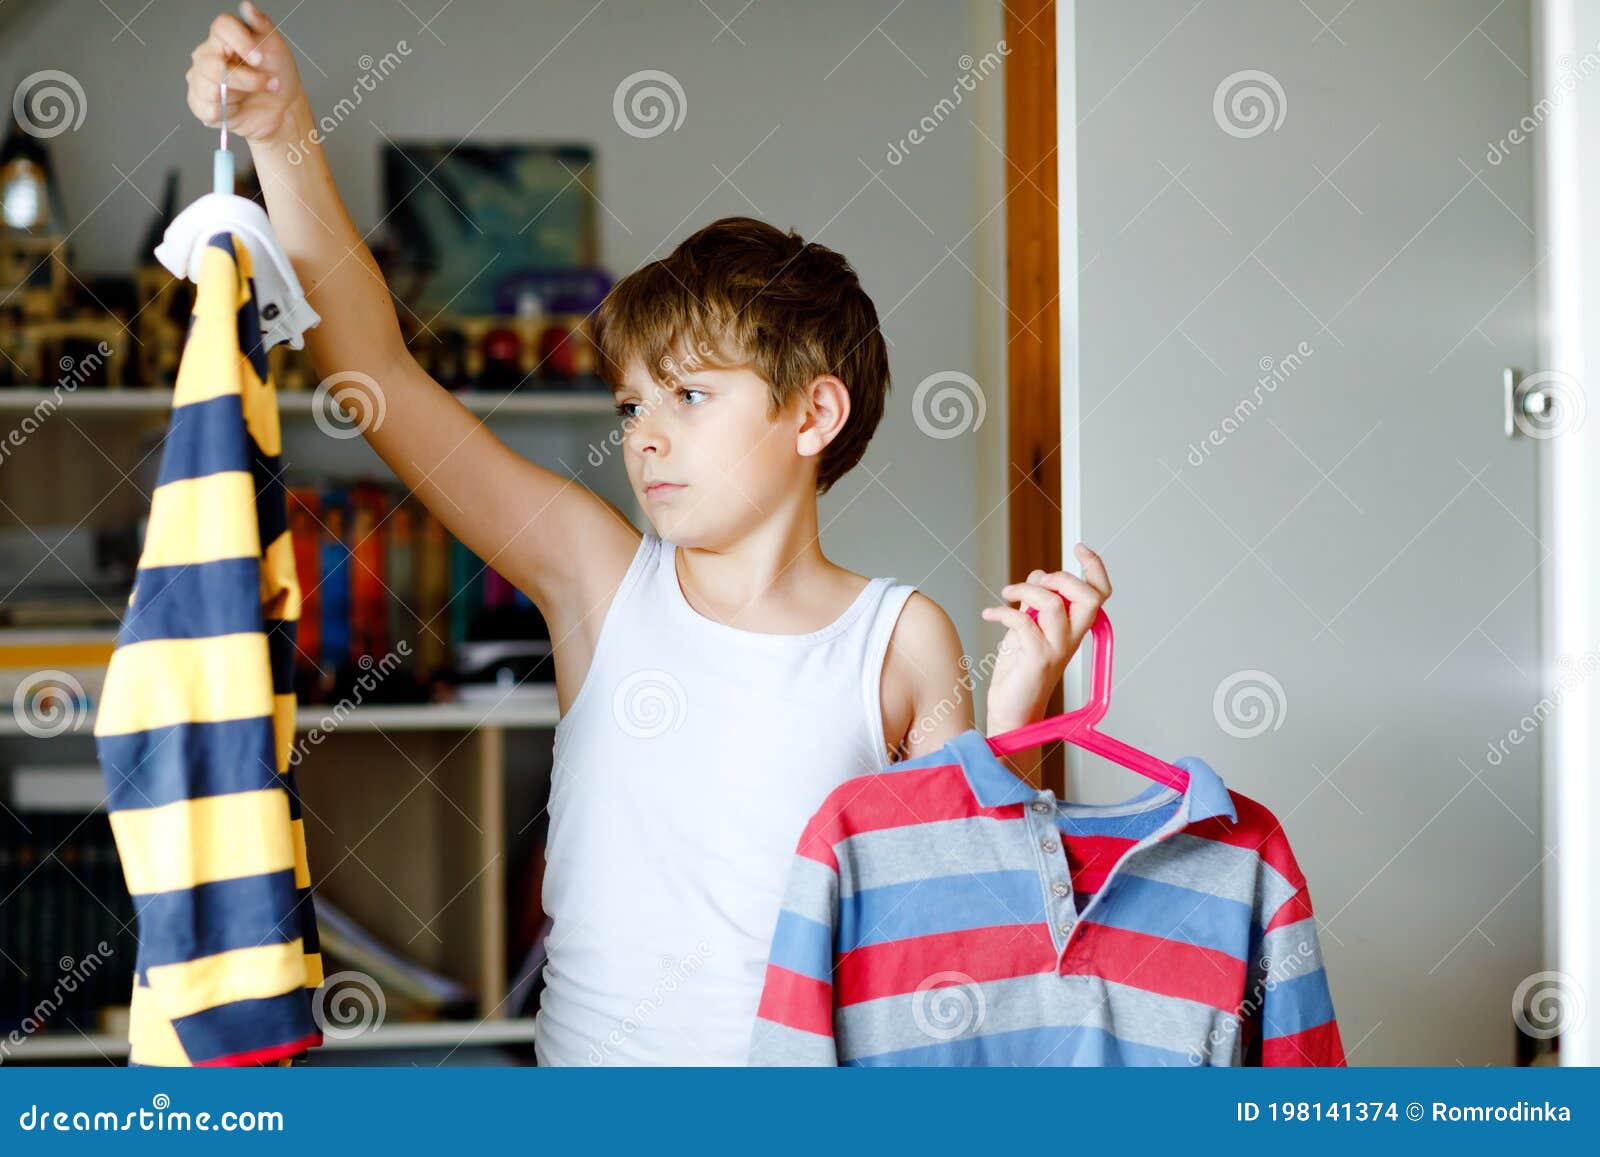 School Kid Boy Standing by Wardrobe with Clothes. Child Making Decision ...